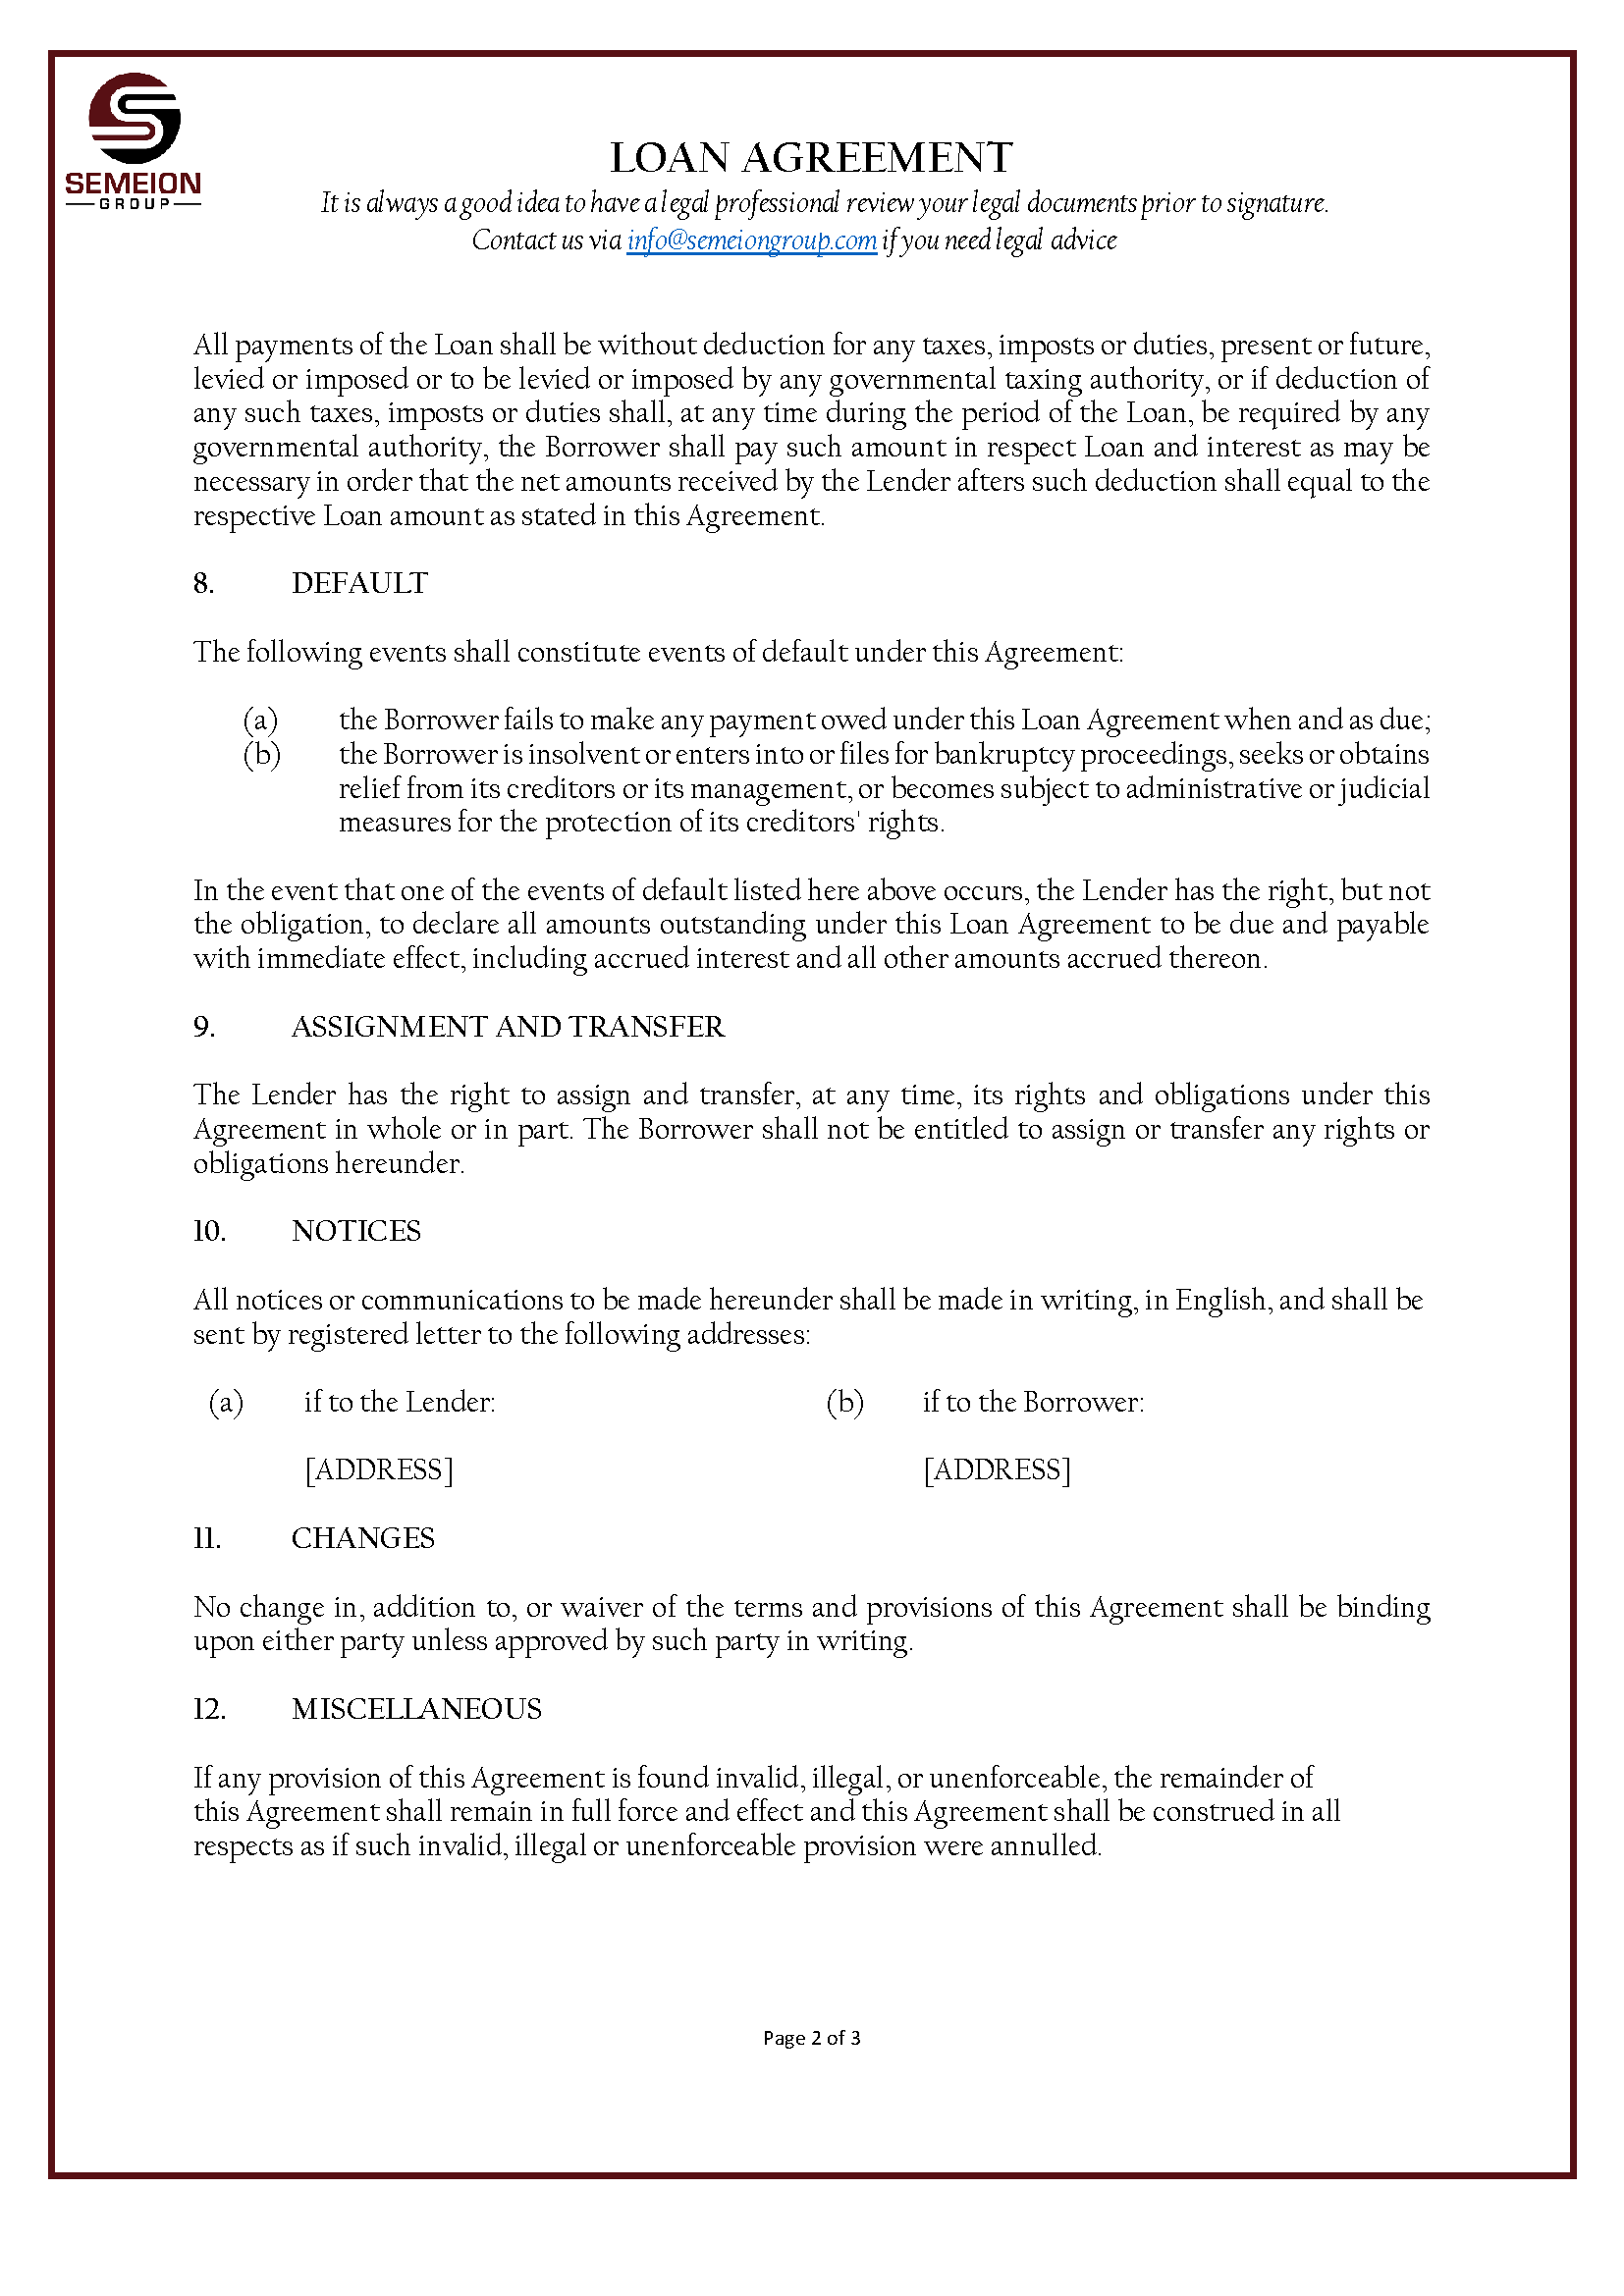 Simple Loan Agreement  Templates at allbusinesstemplates.com In credit terms agreement template